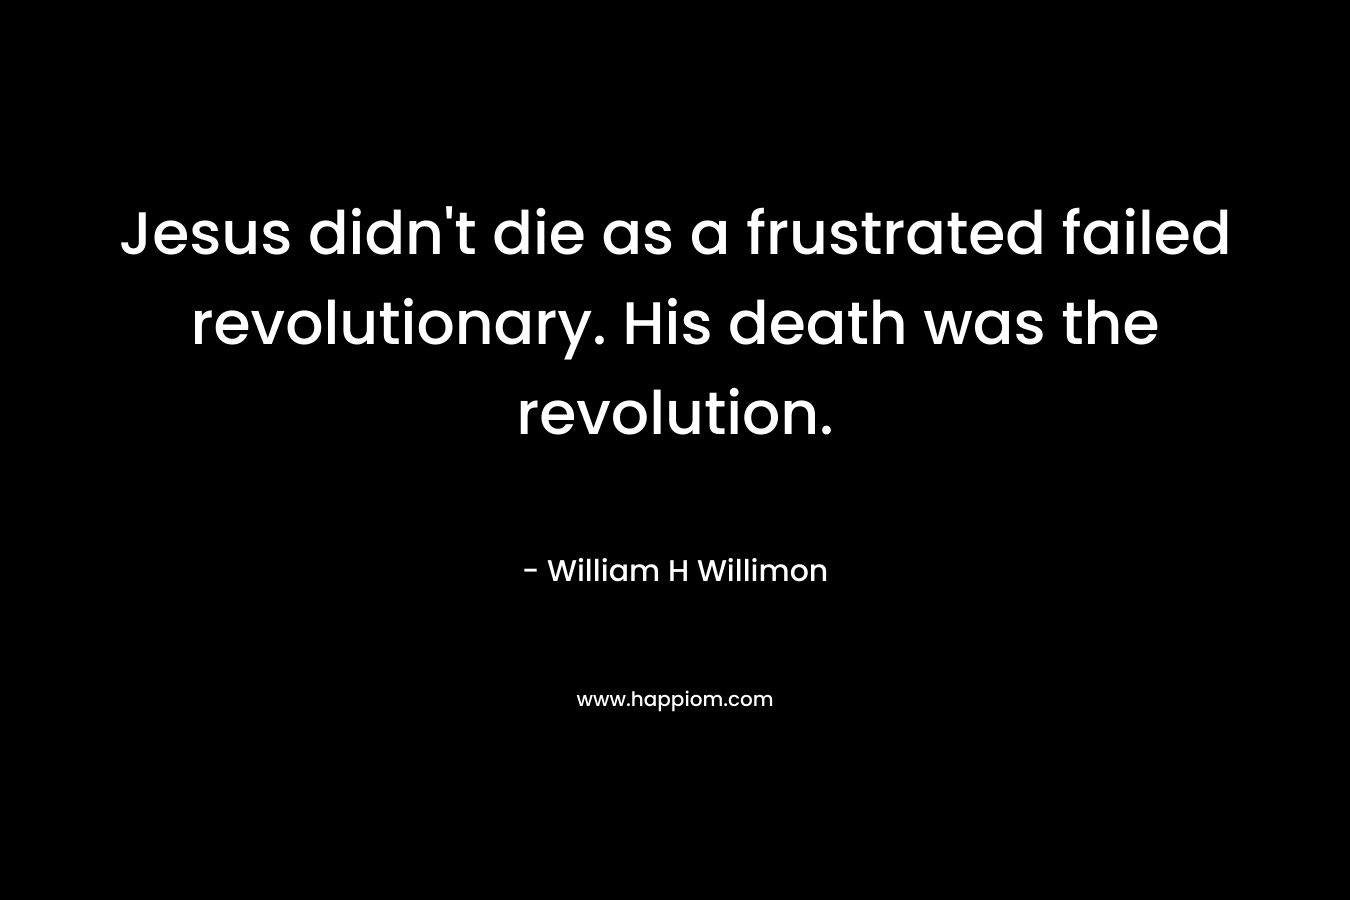 Jesus didn’t die as a frustrated failed revolutionary. His death was the revolution. – William H Willimon